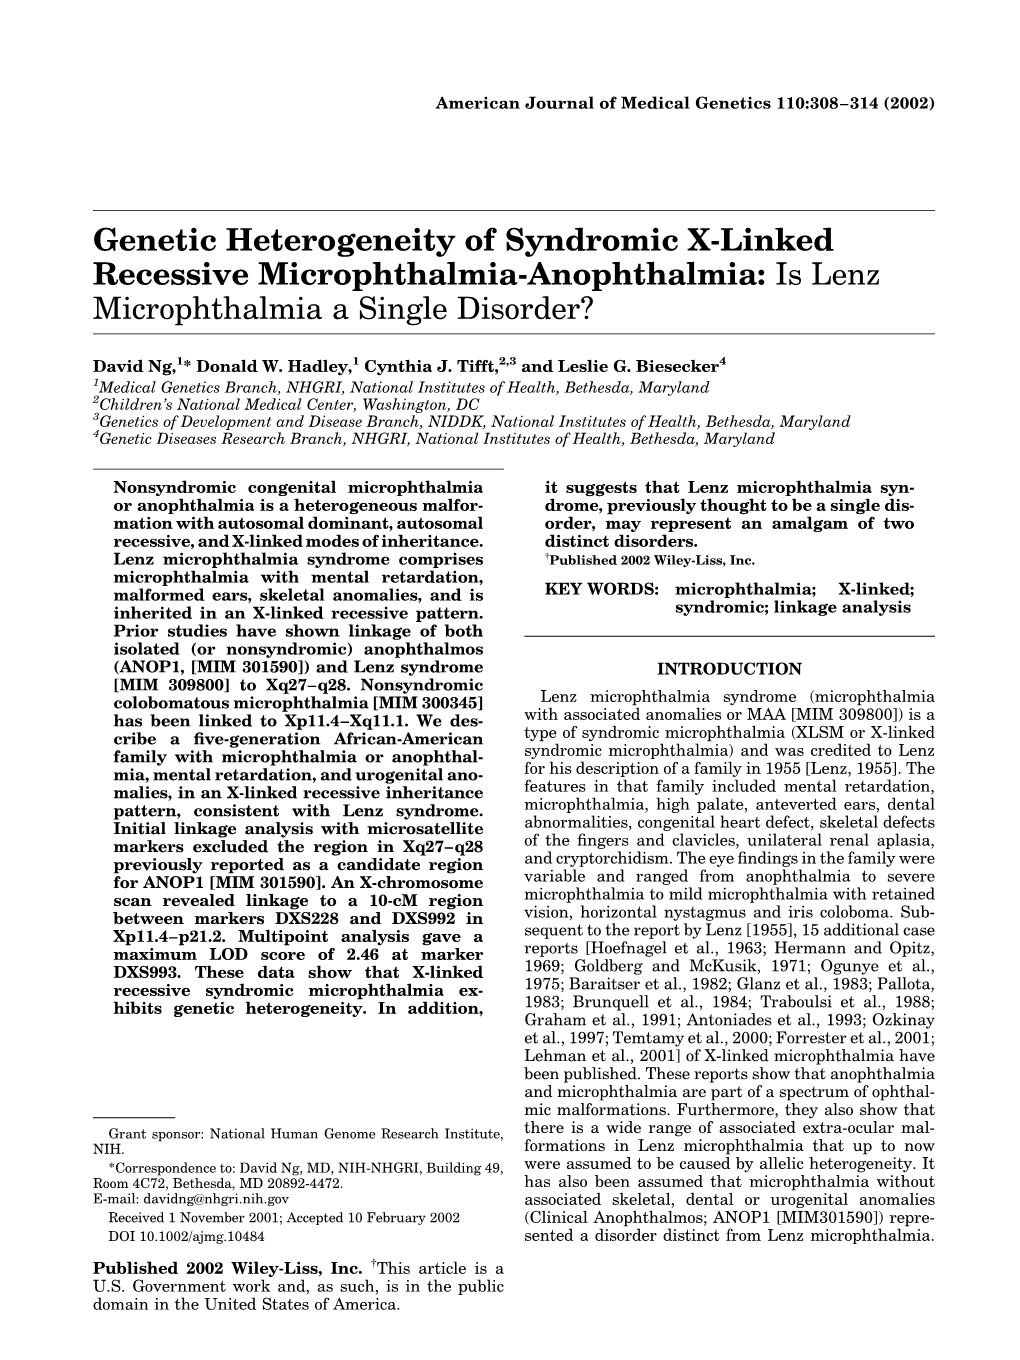 Genetic Heterogeneity of Syndromic X-Linked Recessive Microphthalmia-Anophthalmia: Is Lenz Microphthalmia a Single Disorder?